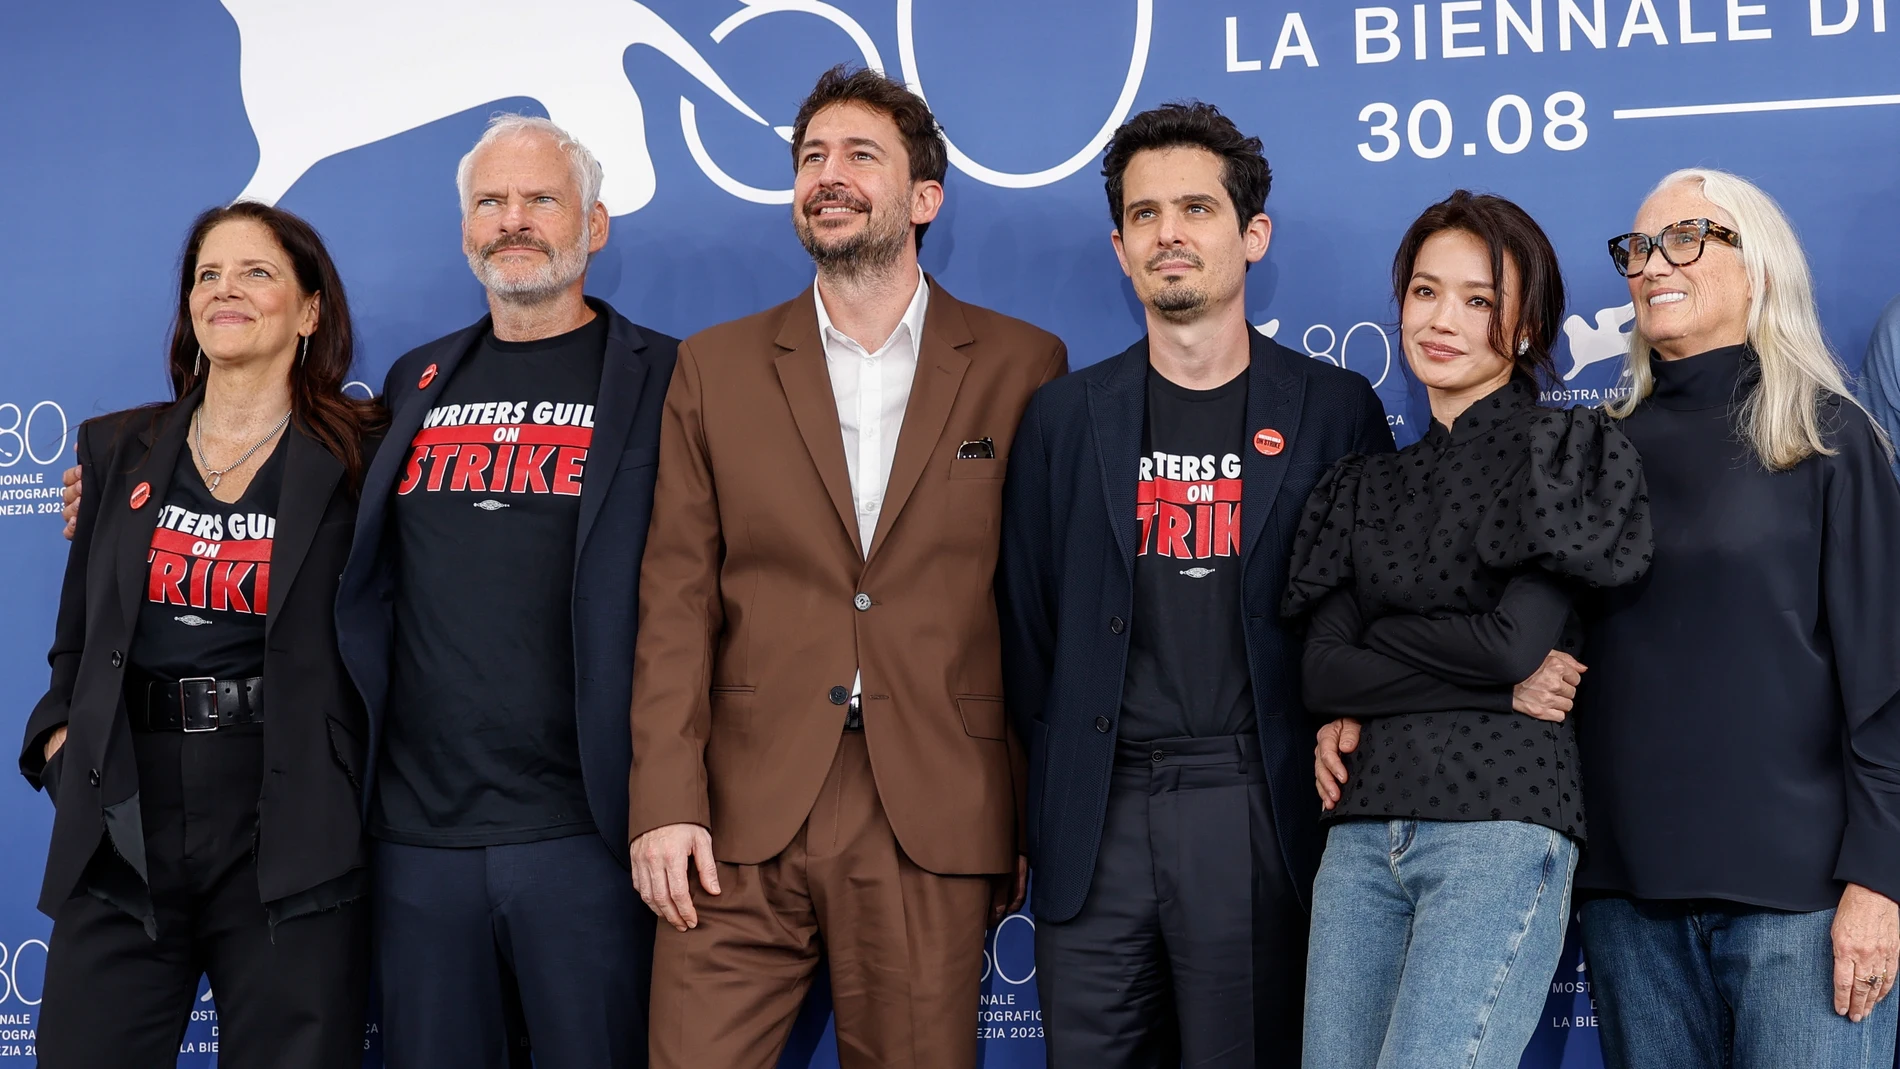 Jury members Laura Poitras, from left, Martin McDonagh, Santiago Mitre, jury president Damien Chazelle, Shu Qi and Jane Campion pose for photographers during the photo call for the Jury during the 80th edition of the Venice Film Festival in Venice, Italy, on Wednesday, Aug. 30, 2023. (Photo by Vianney Le Caer/Invision/AP)